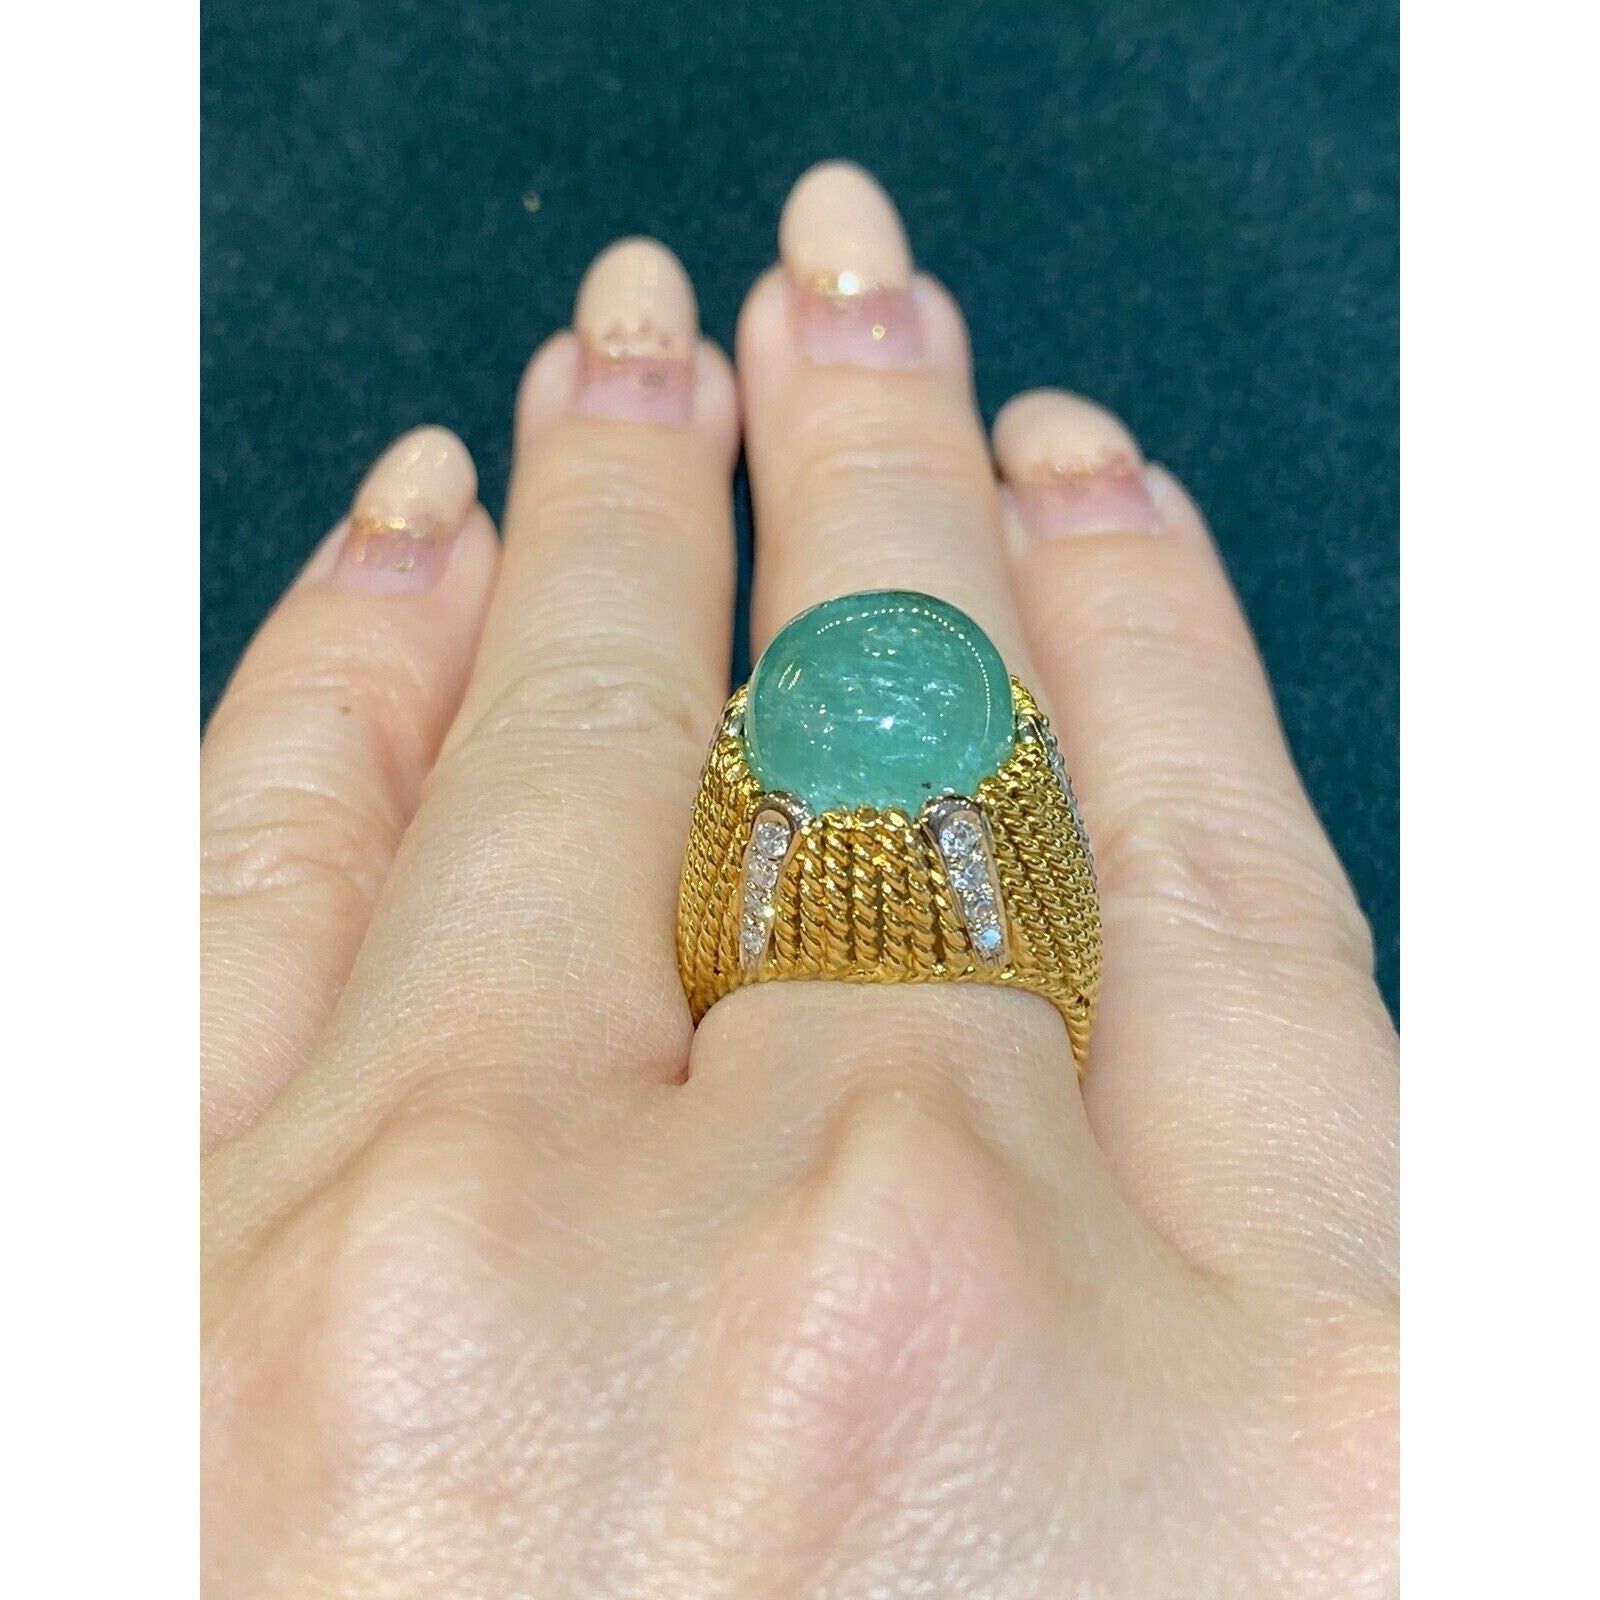 10 carat Emerald Cabochon & Diamond High Dome Cocktail Ring - HM2315AB